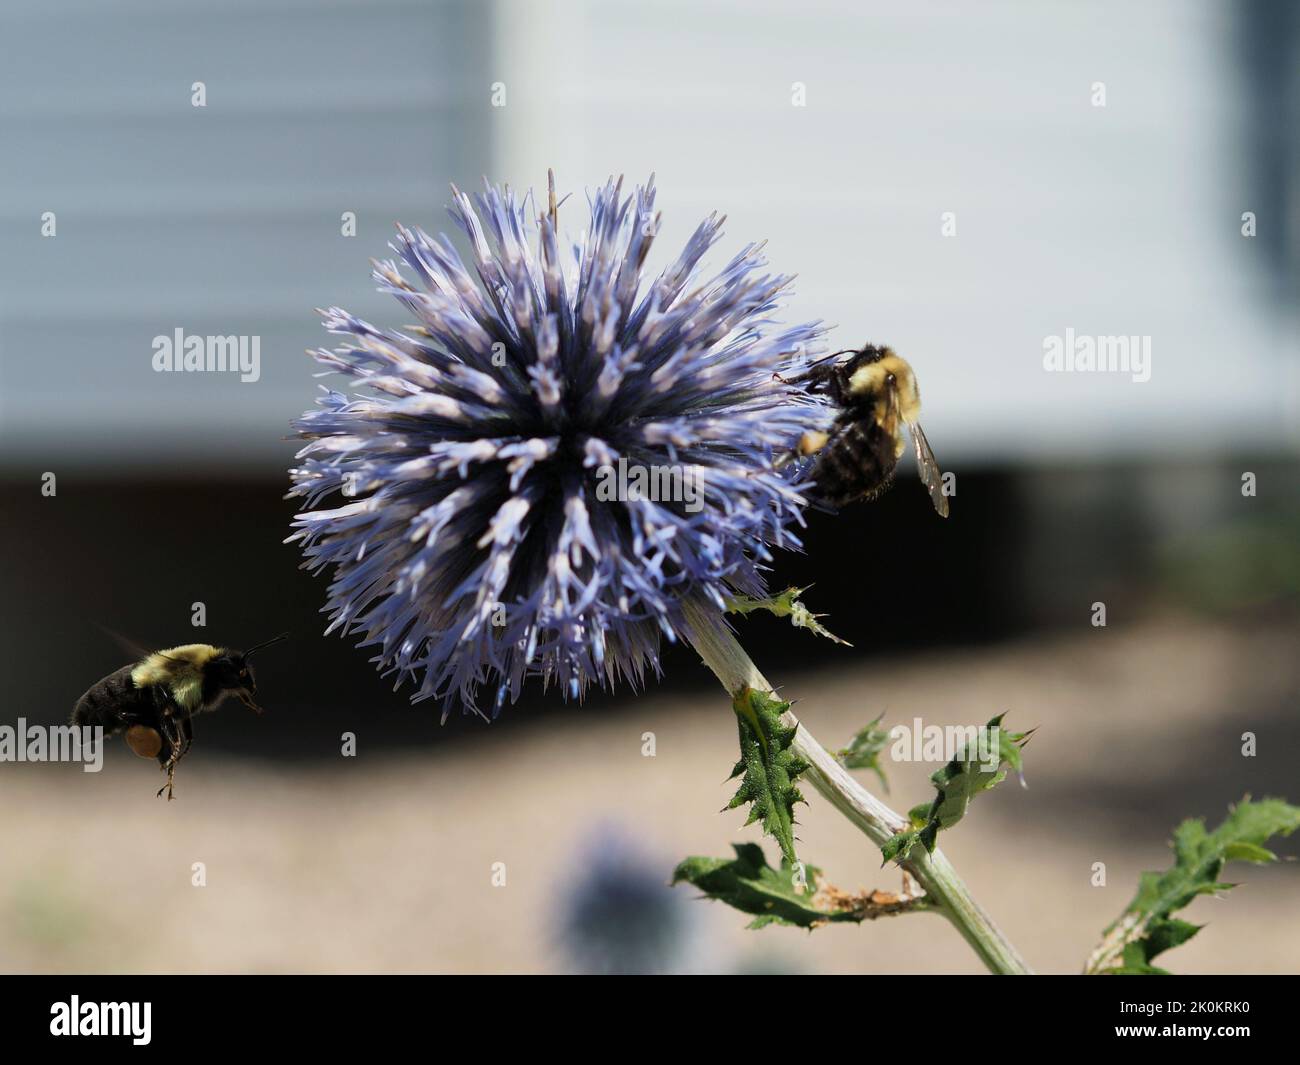 Two bumble bees collecting pollen from a globe thistle (Echinops ritro) in a garden in Ottawa, Ontario, Canada. Stock Photo